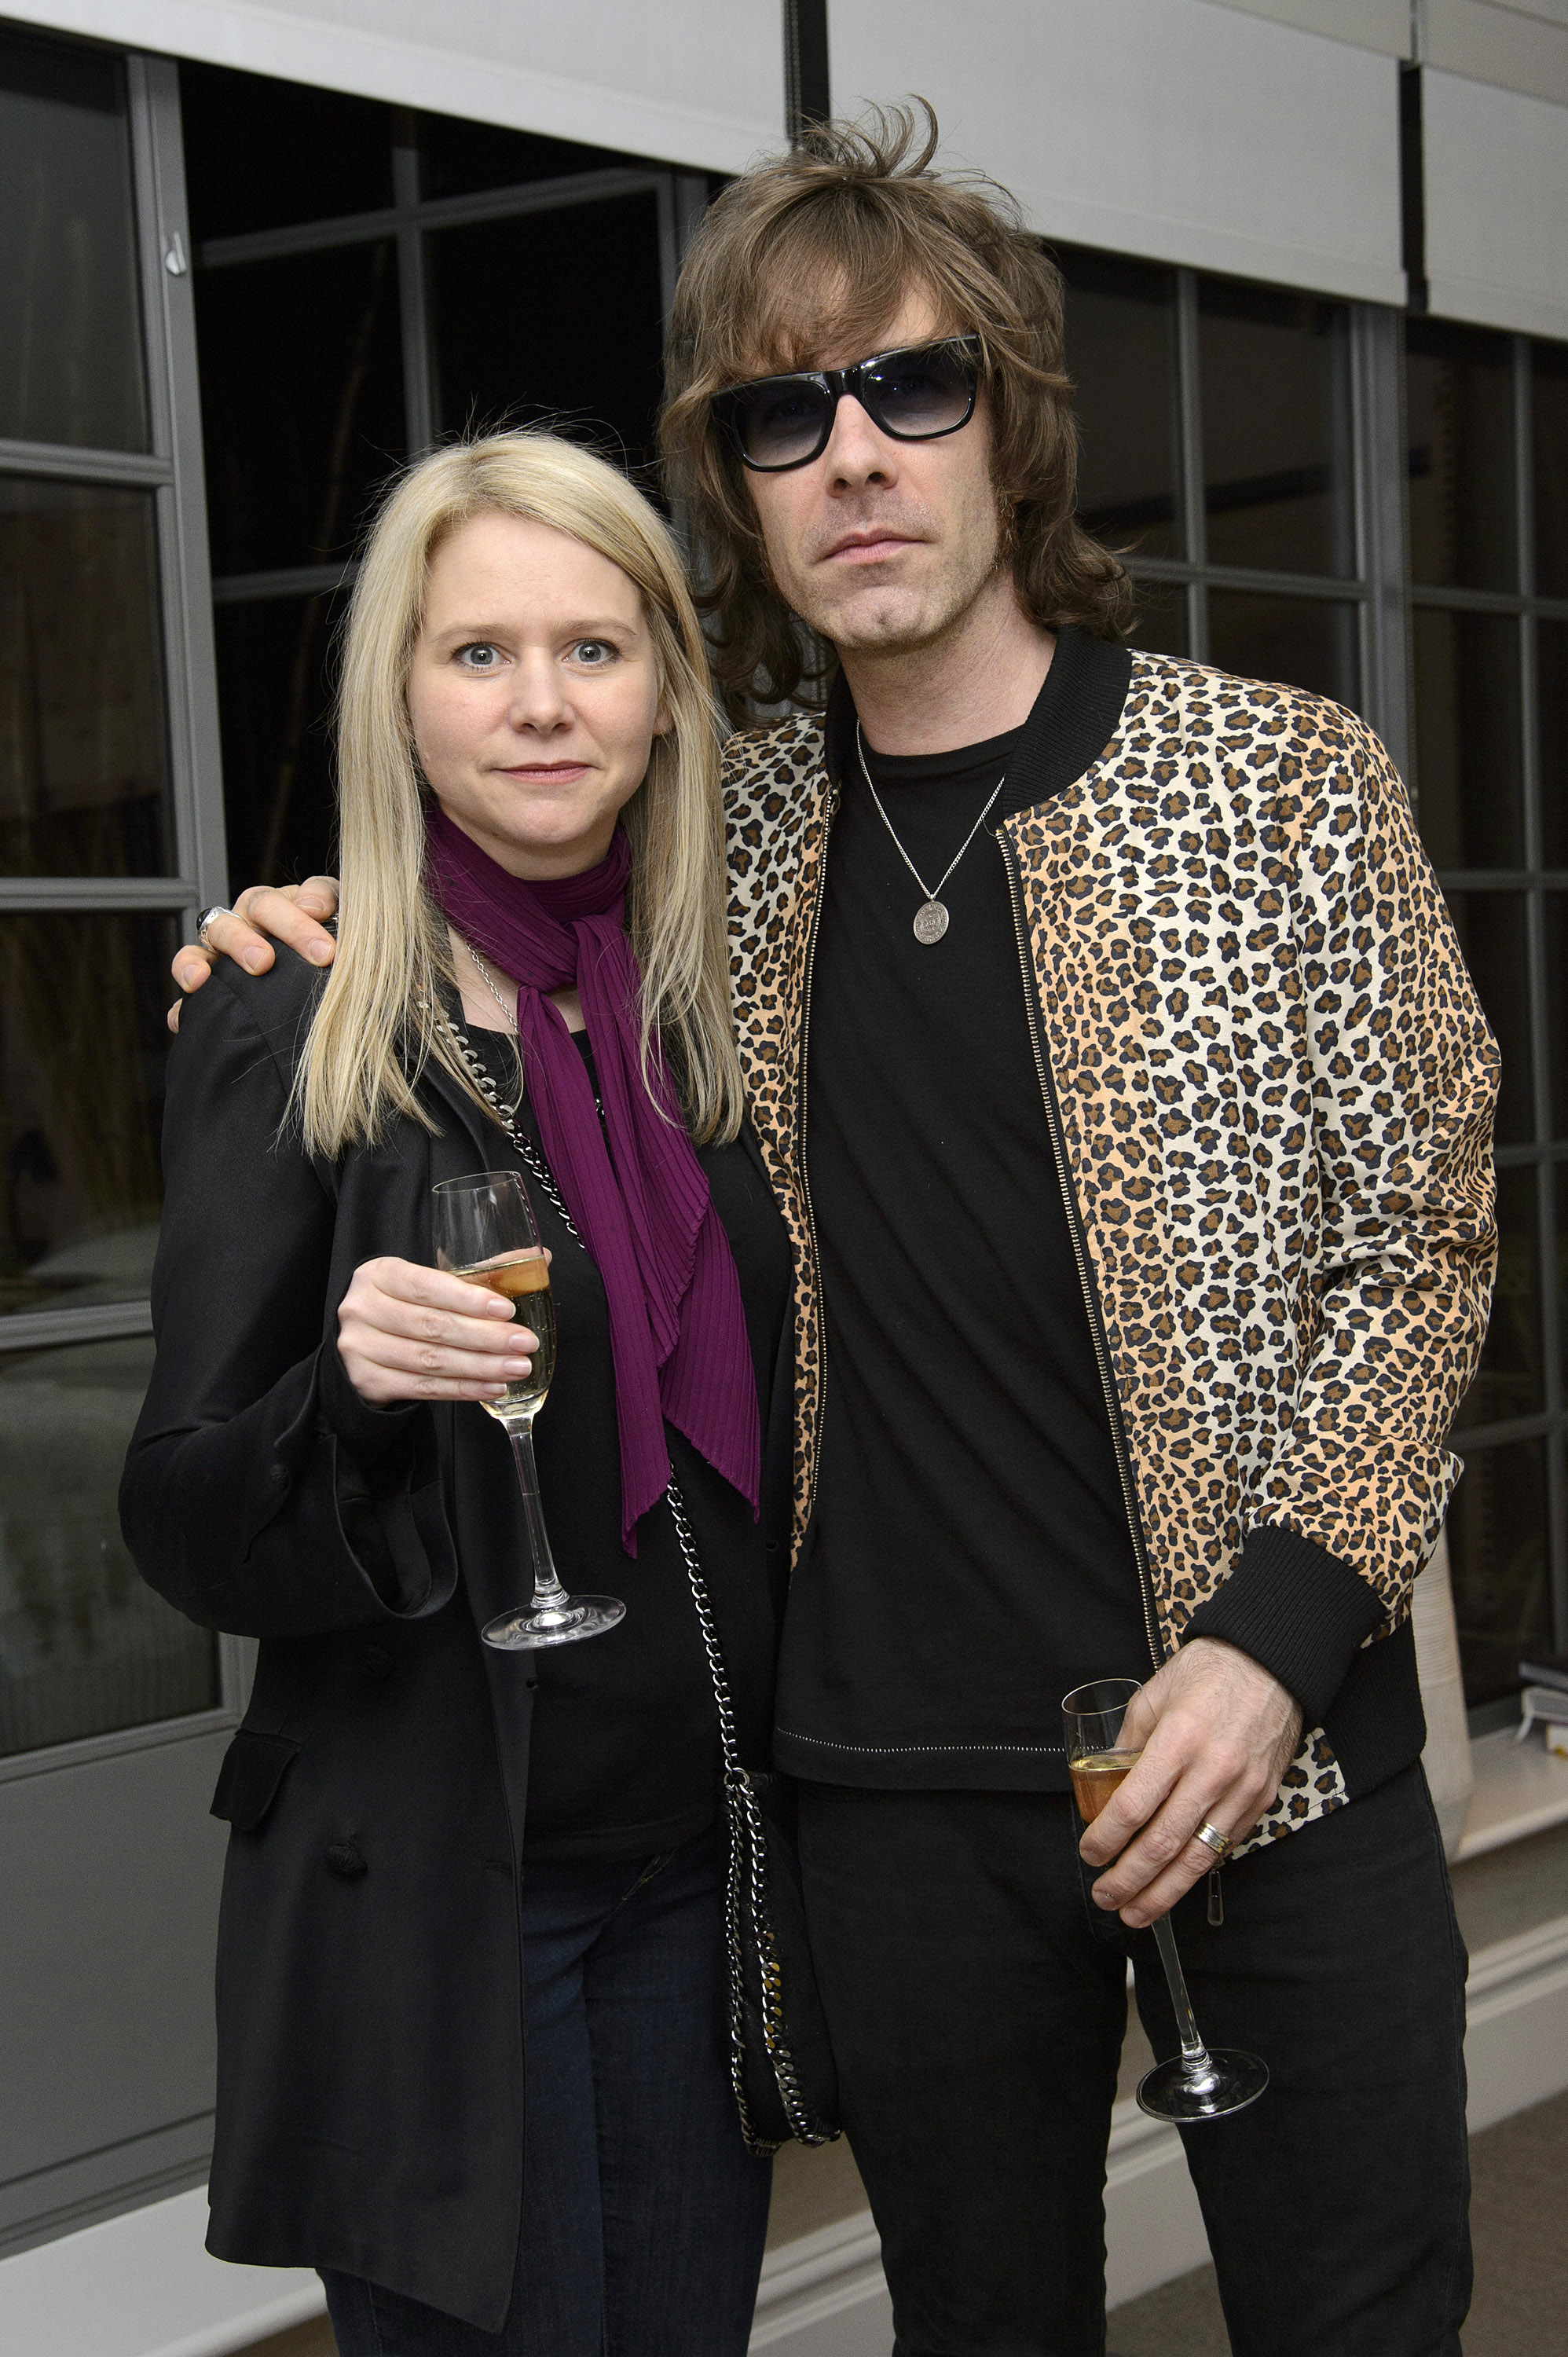 Lee Starkey and Jay Mehler attend Meg Mathews of MM Designs and Rachel Galley Jewellery Design launch of their first collaboration "The Venom Collection" on November 8, 2012, in London, England | Source: Getty Images